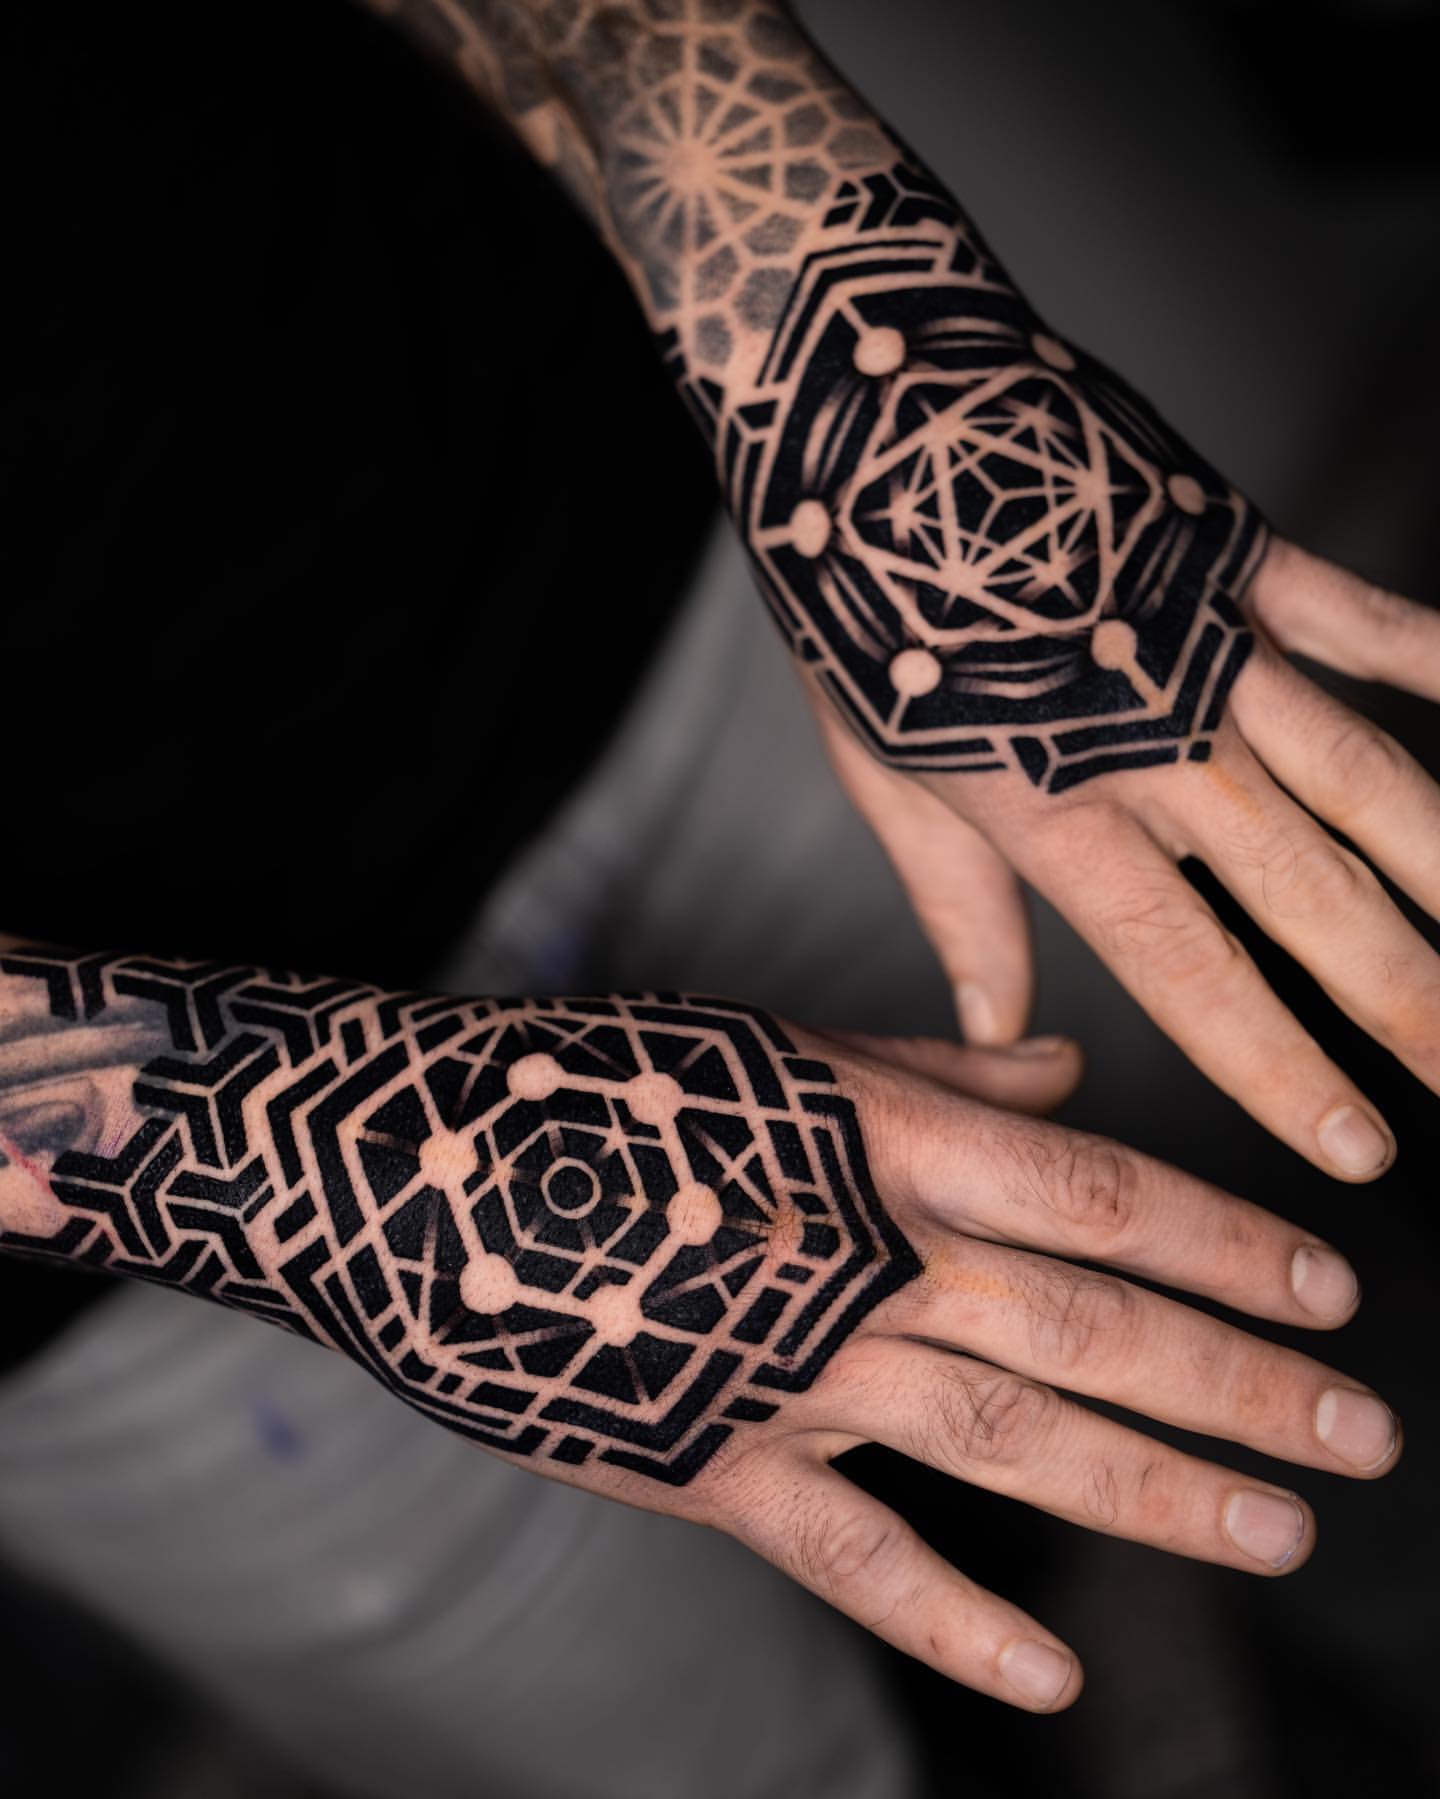 The Different Meanings of Geometric Tattoos by Inkaholik